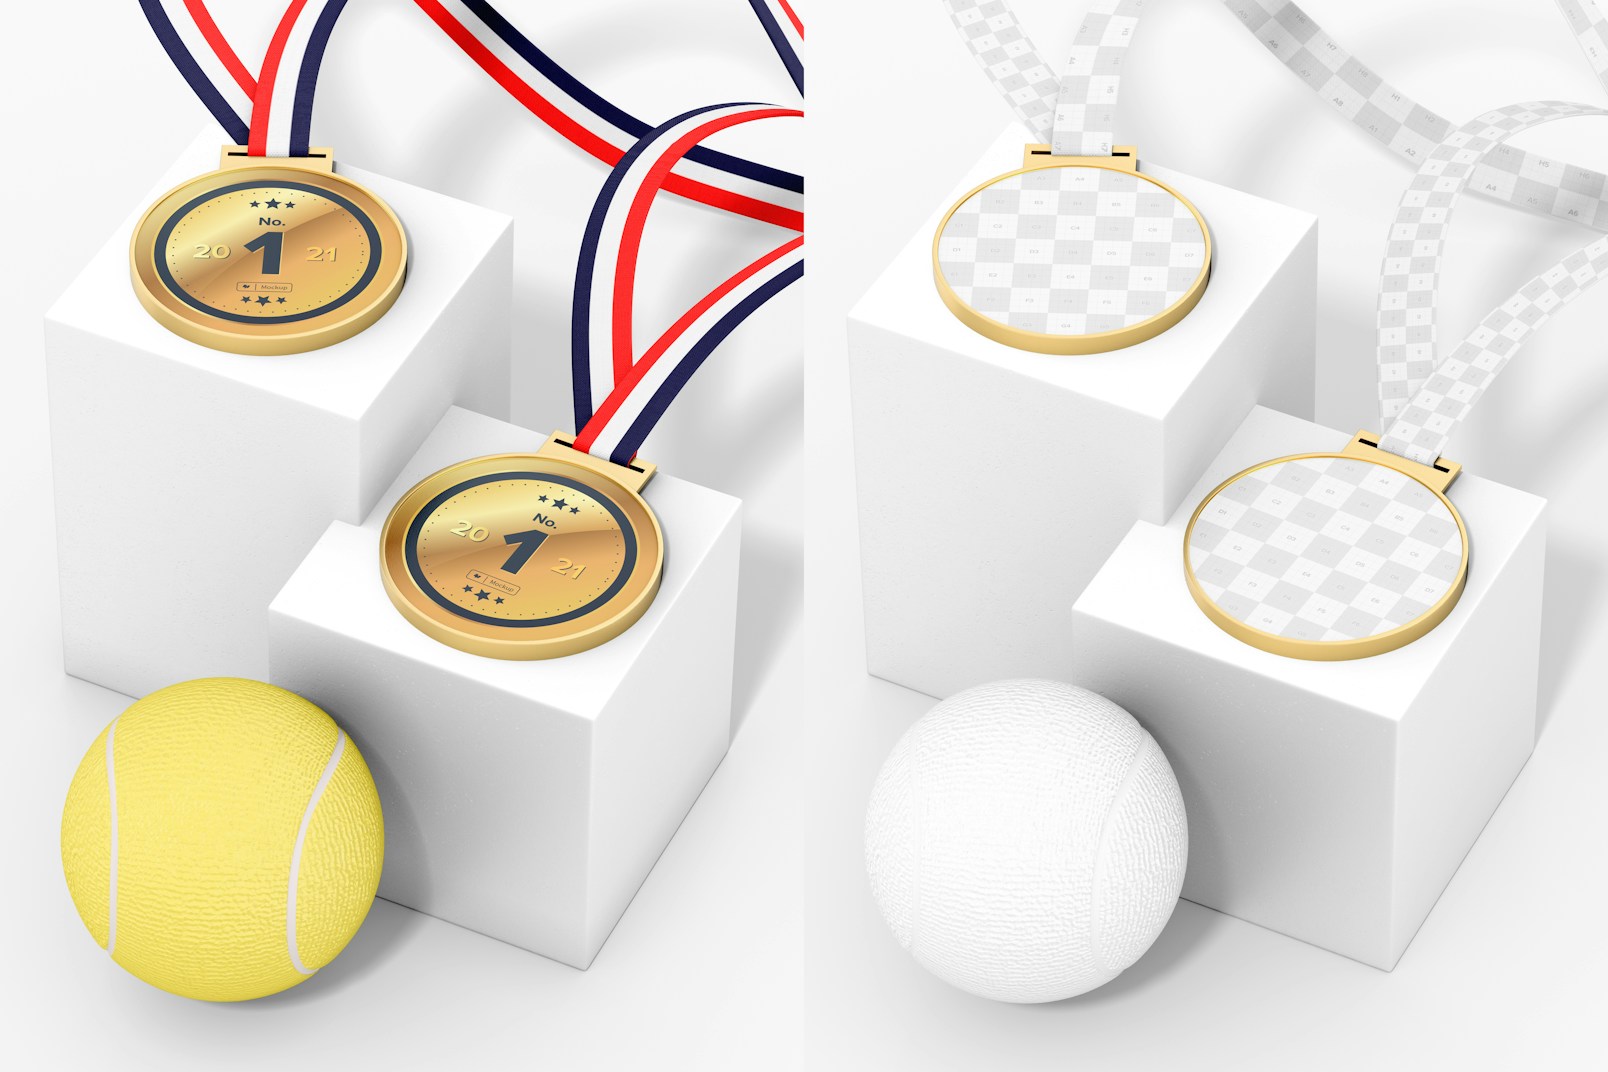 Round Competition Medals with Ribbon Mockup, Perspective